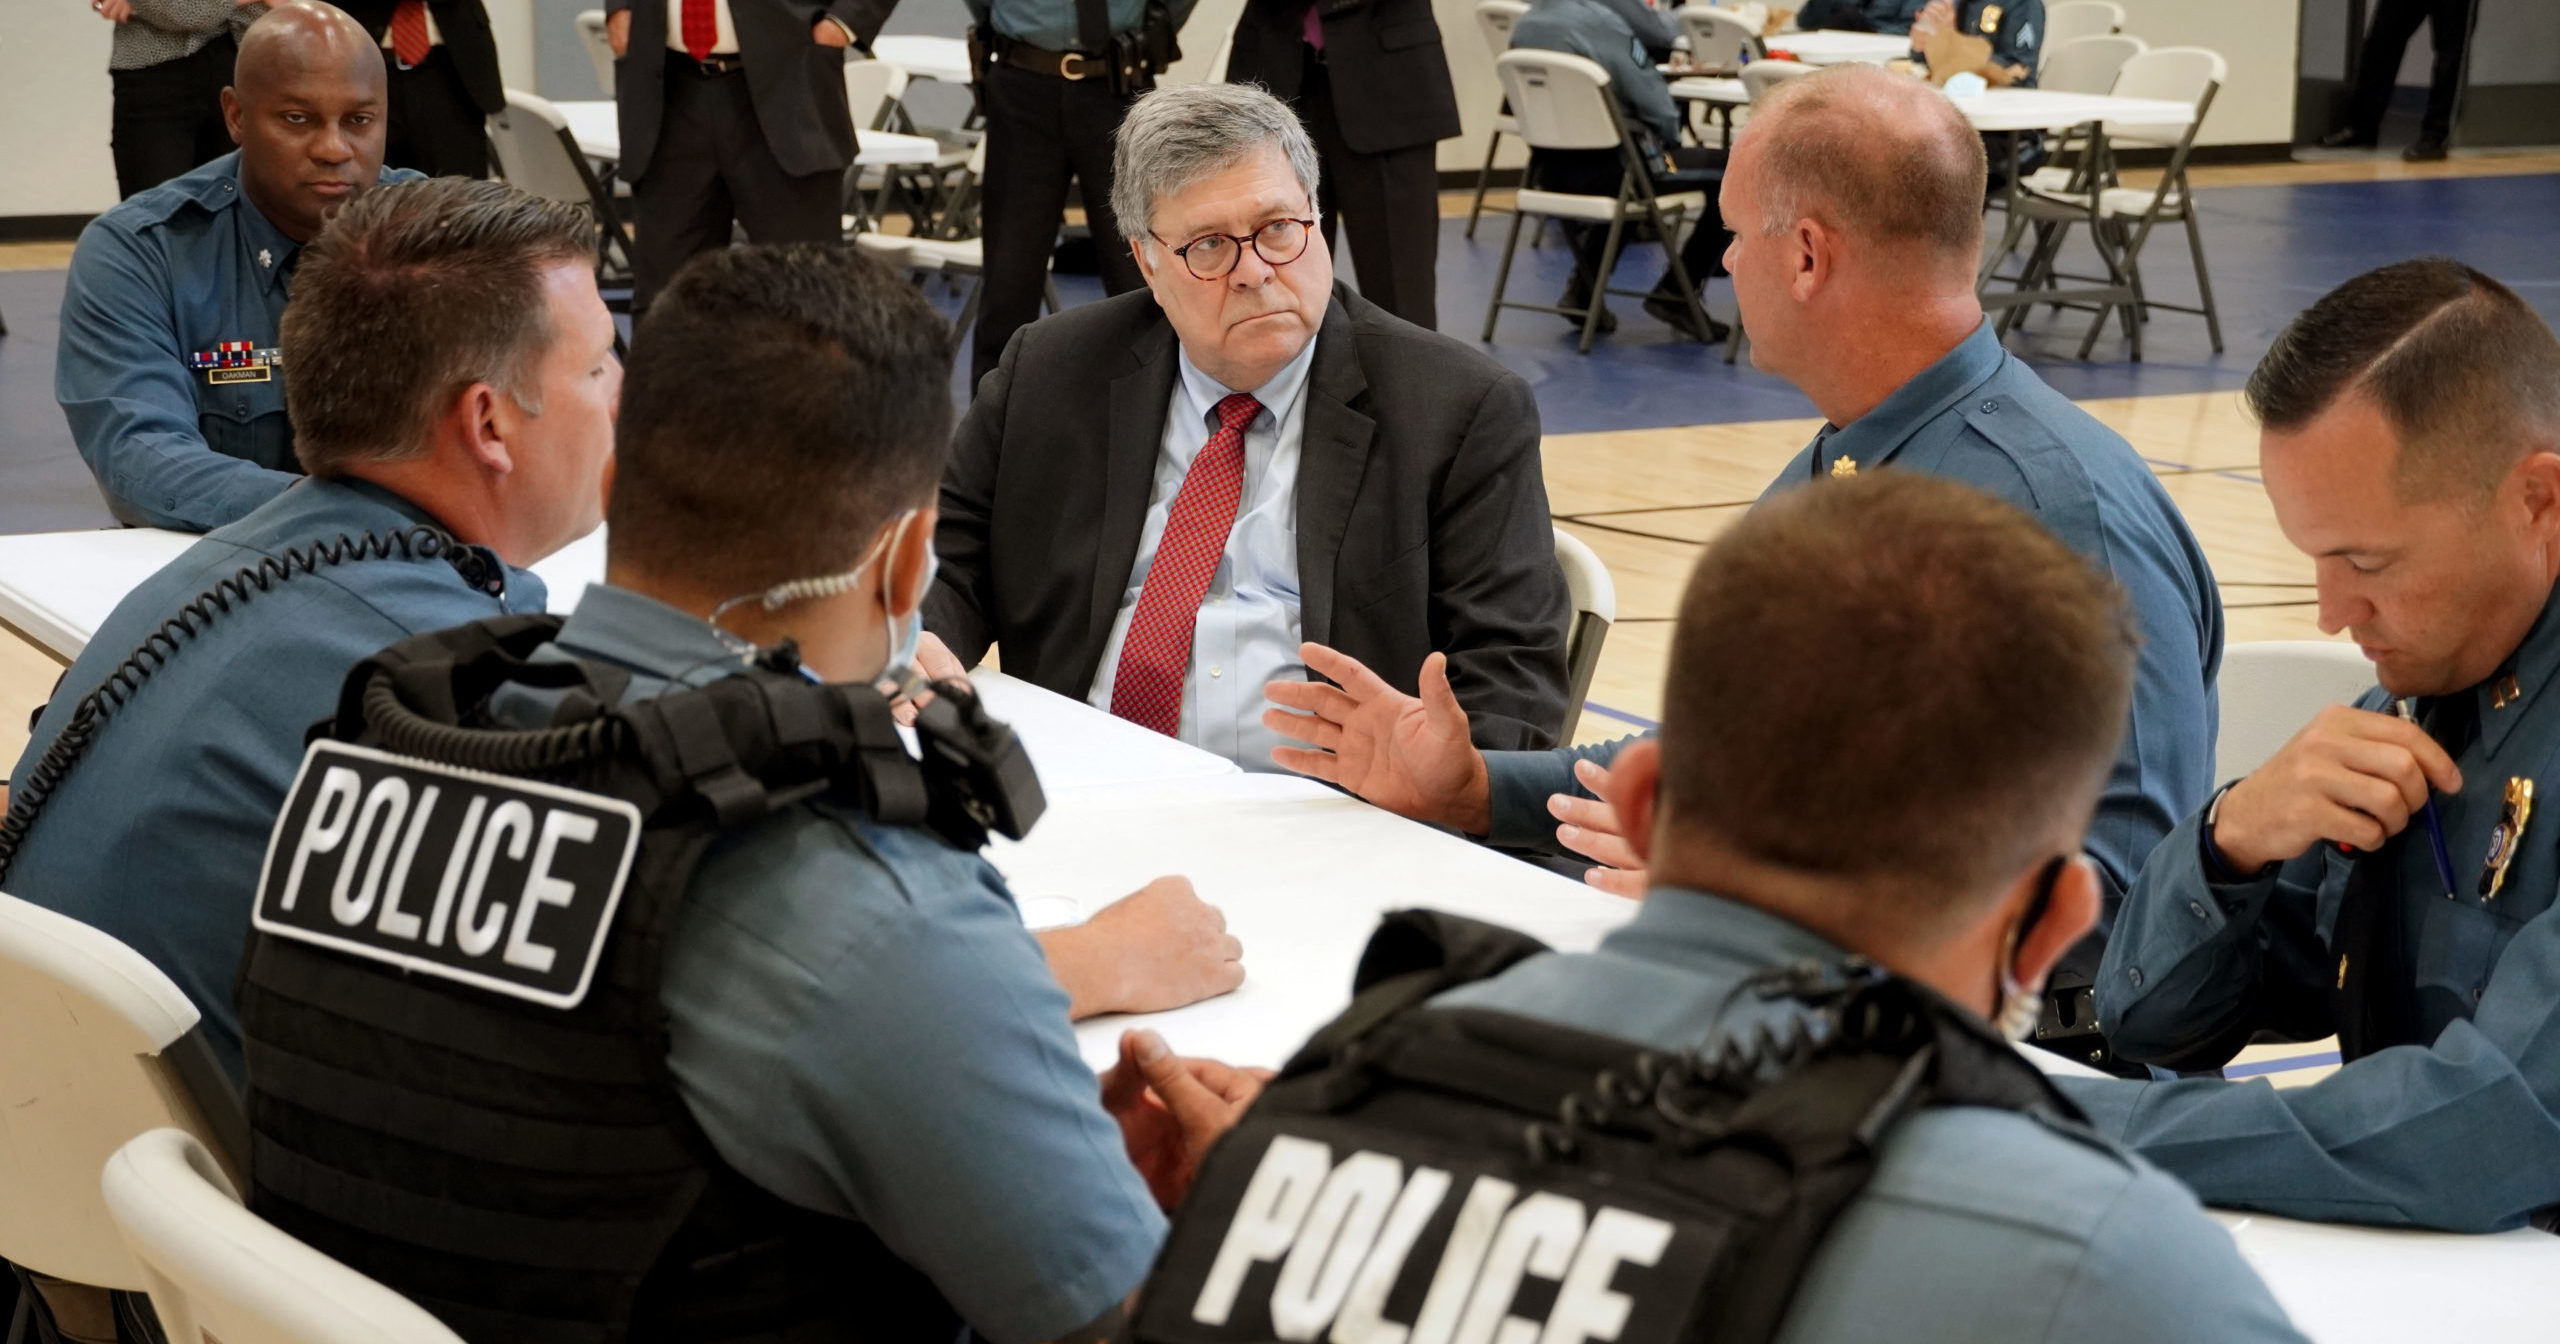 In this Aug. 19, 2020, photo, Attorney General William Barr speaks with police officers from the Kansas City Police Department in Kansas City, Missouri.